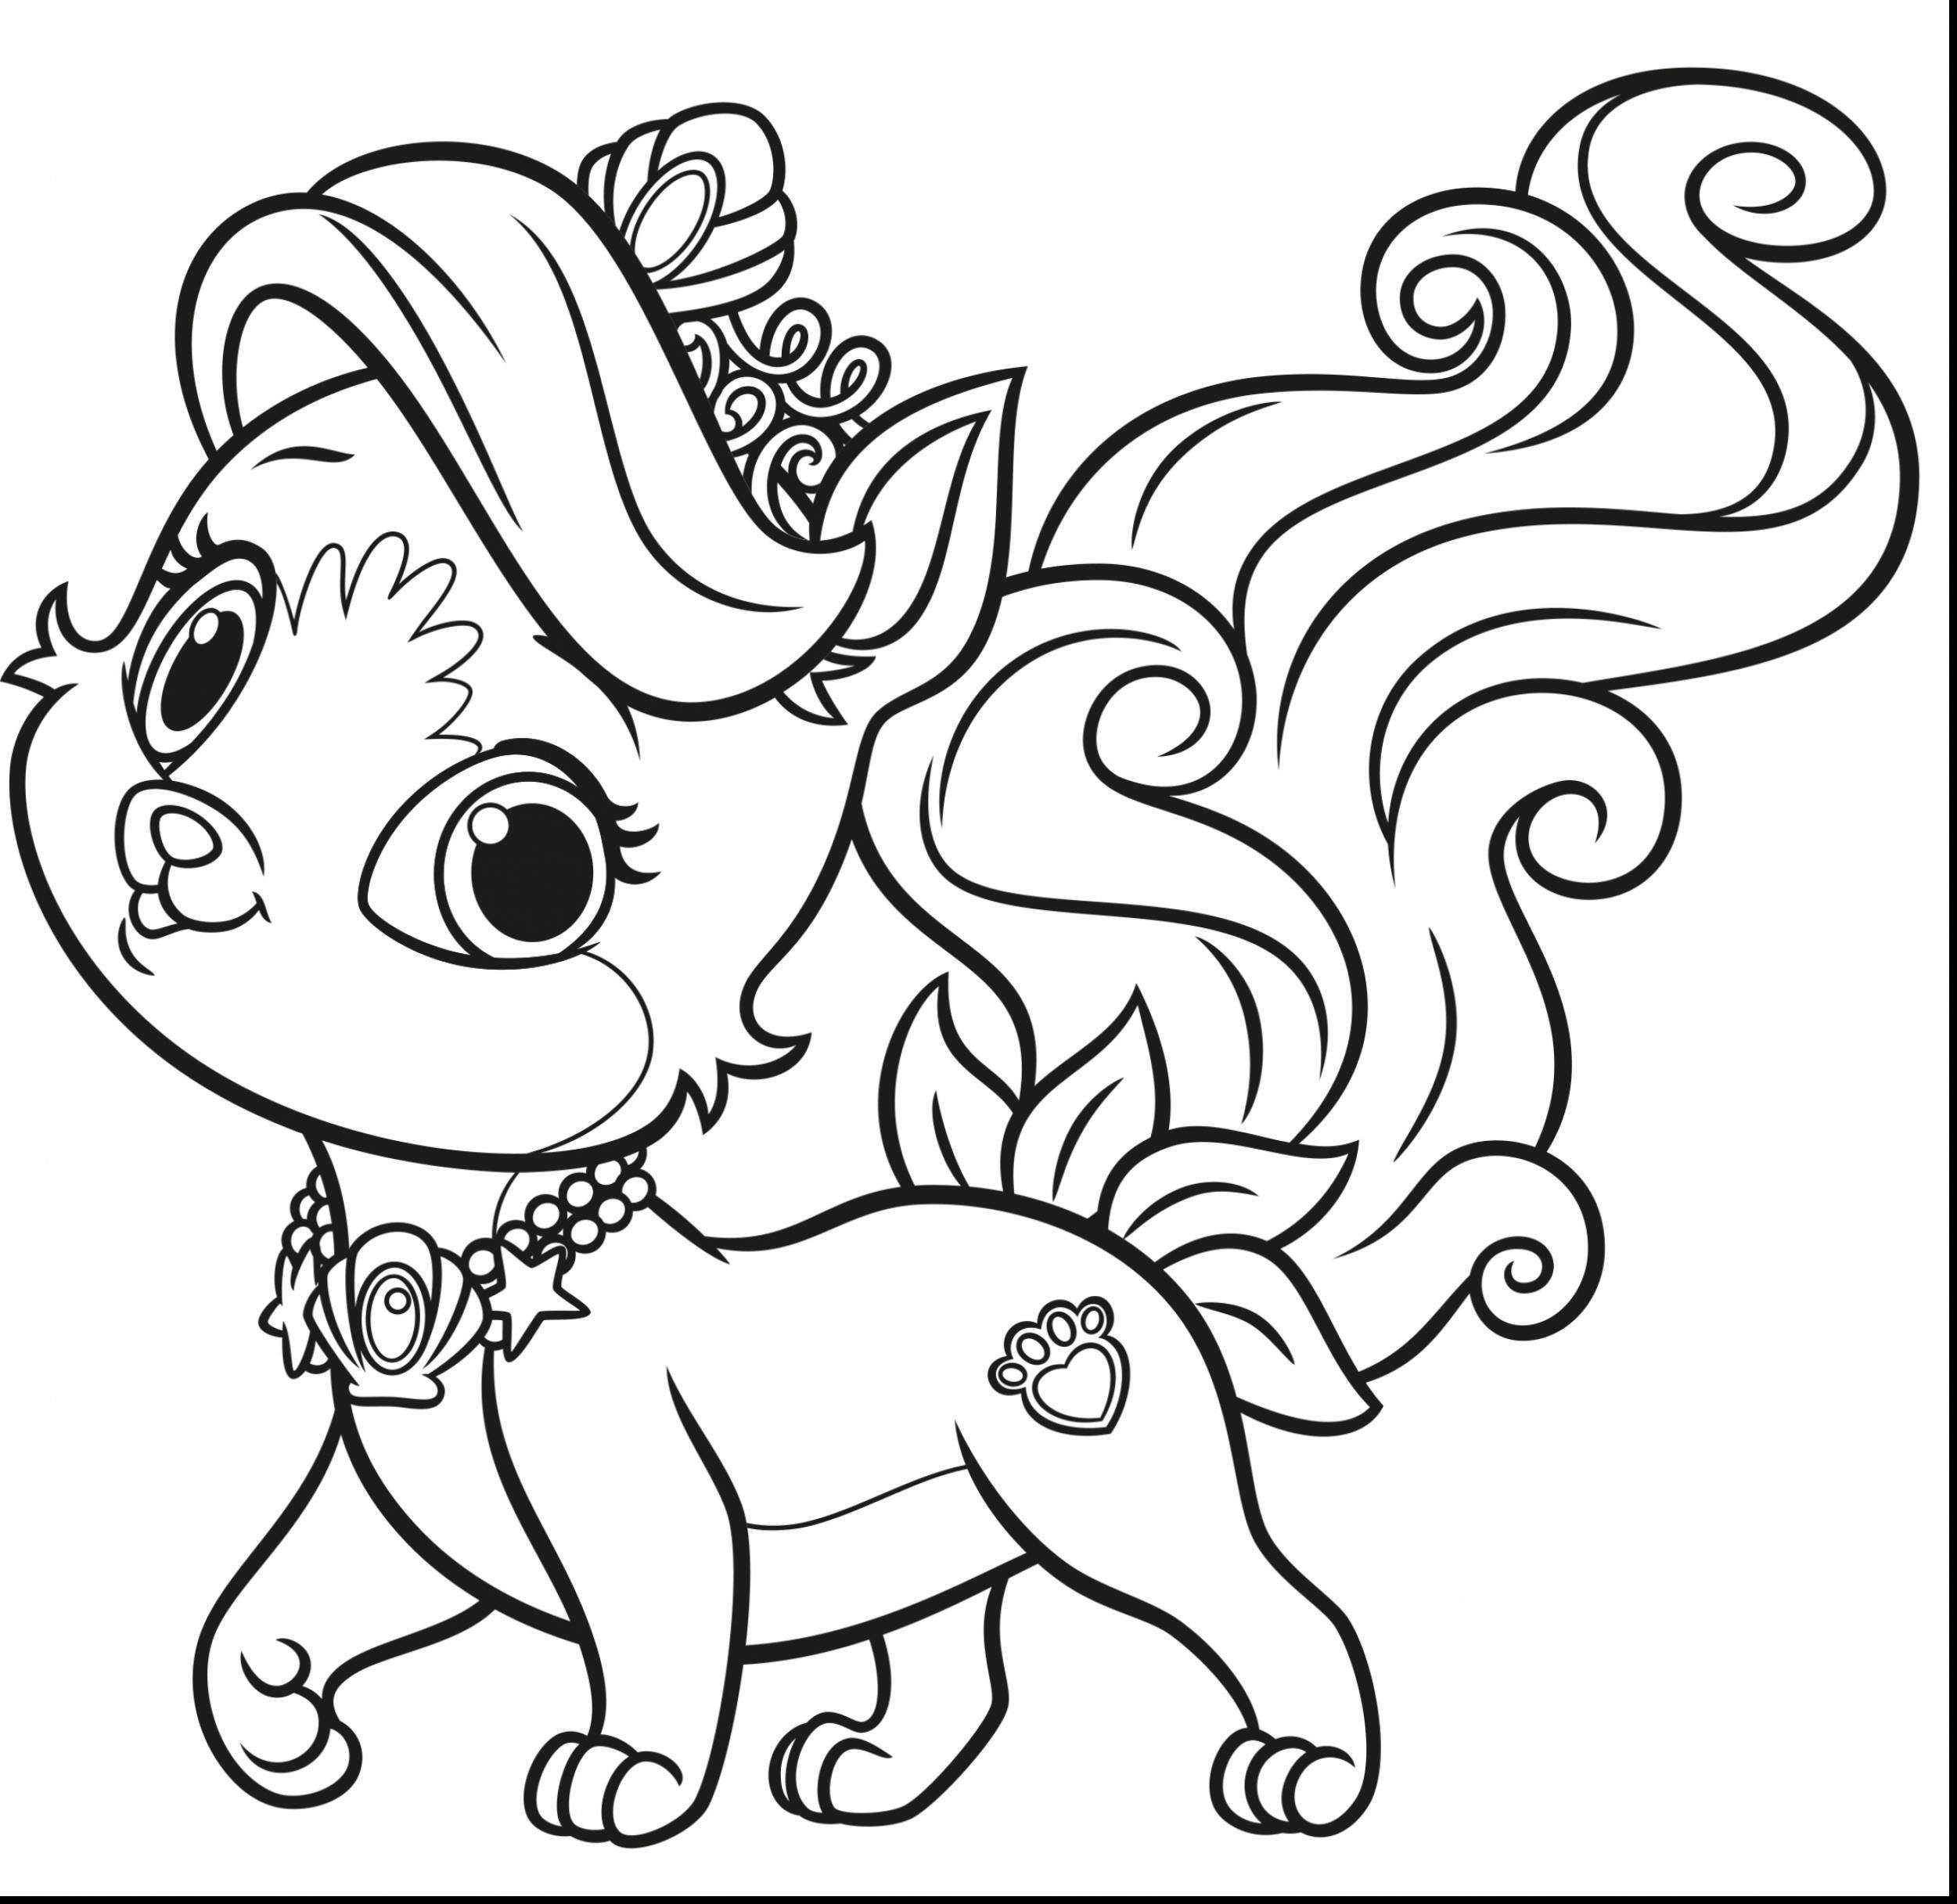 Pet Coloring Pages with Wallpapers High Quality Resolution Pet Coloring Pages with Wallpapers High Quality